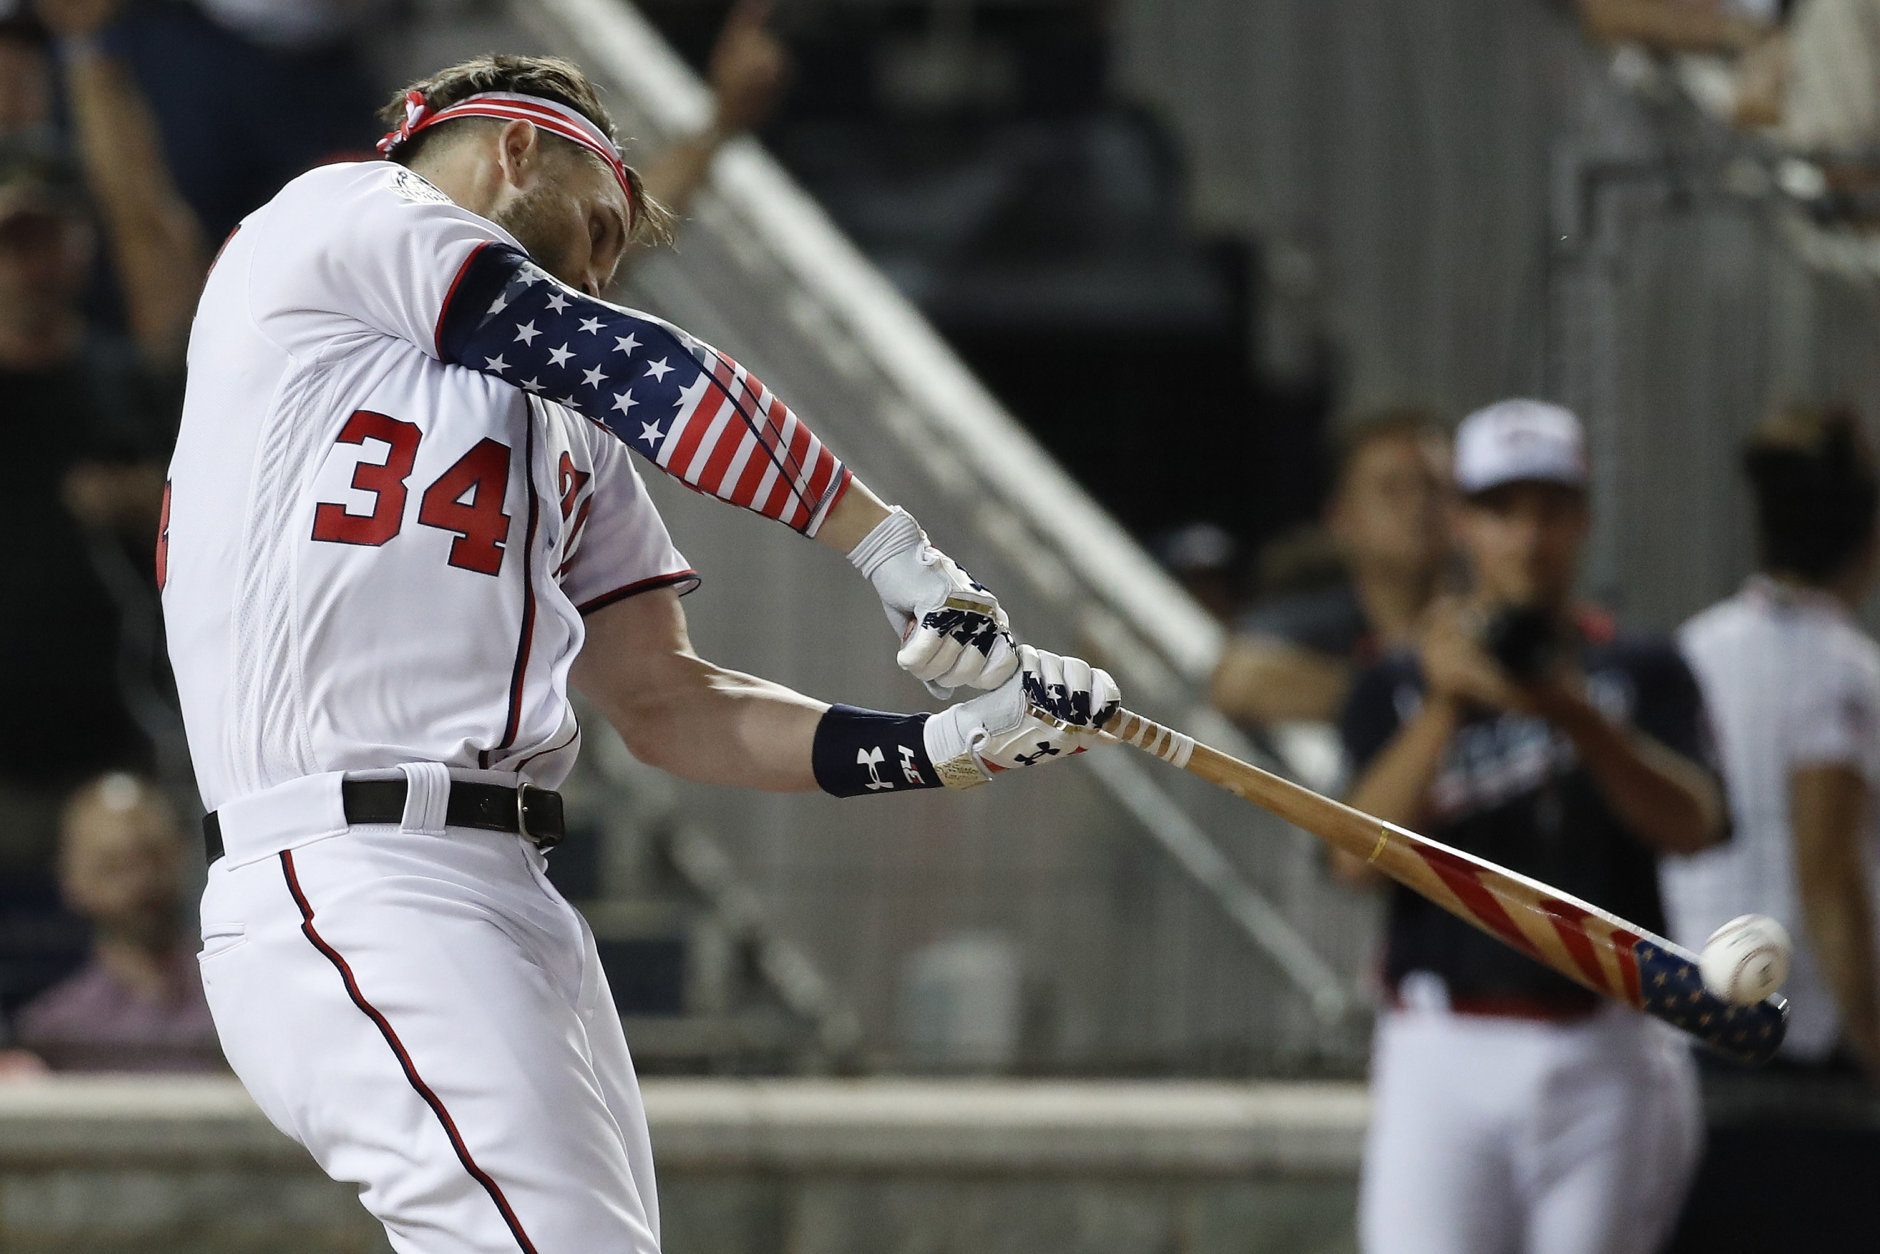 Washington Nationals Bryce Harper hits during the MLB Home Run Derby, at Nationals Park, Monday, July 16, 2018 in Washington. The 89th MLB baseball All-Star Game will be played Tuesday. (AP Photo/Alex Brandon)